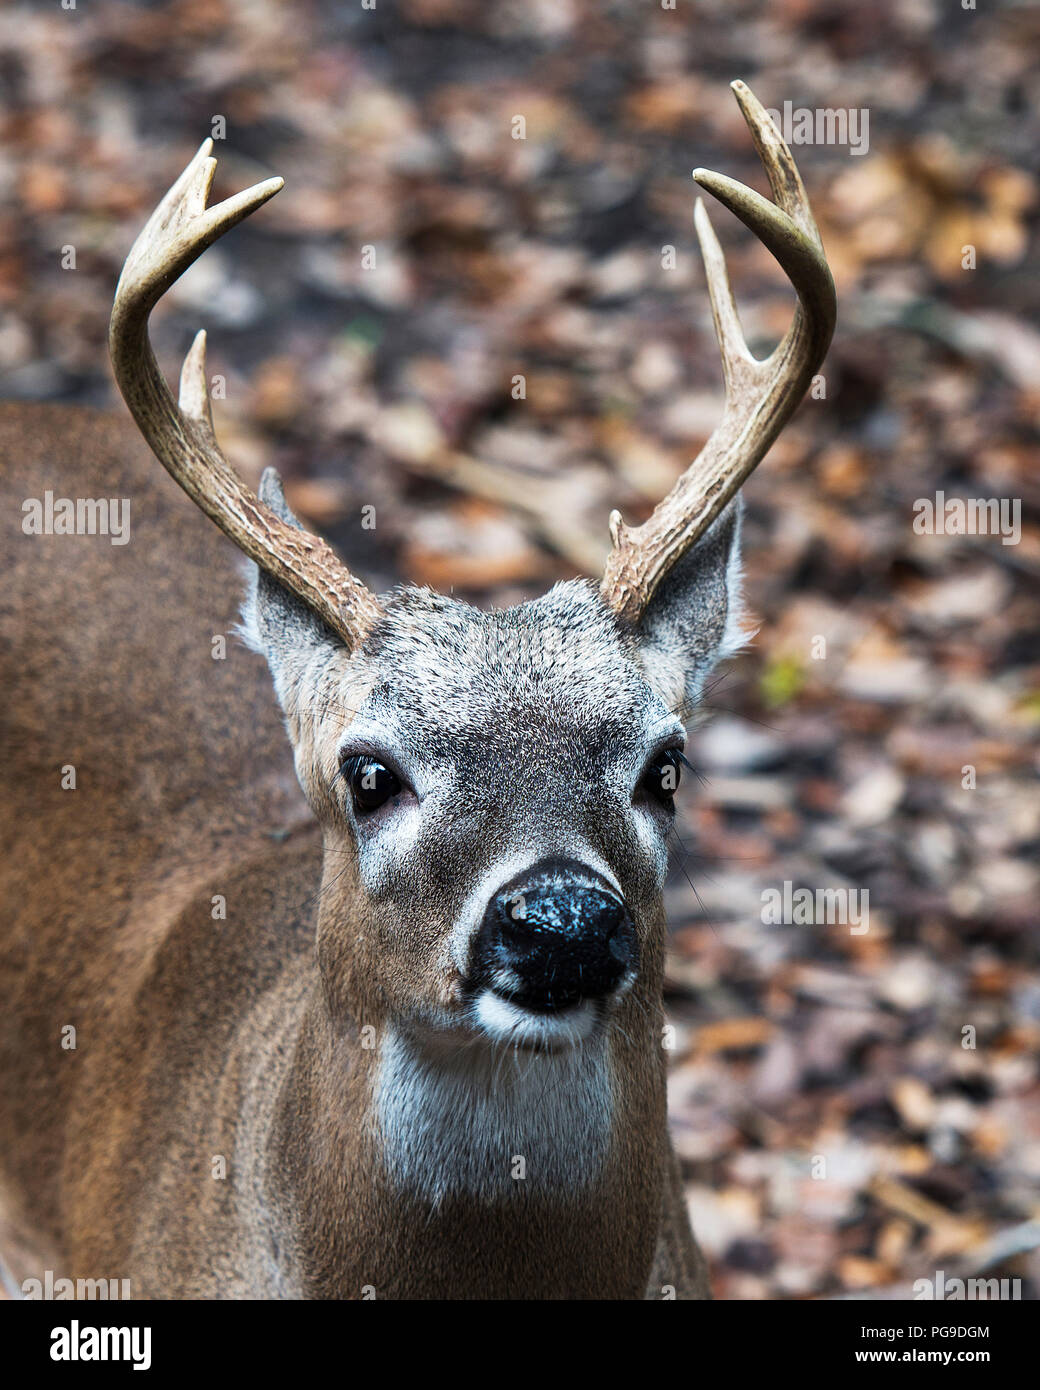 Deer Florida Key Deer animal close-up head view, antlers, ears, eyes, nose, in its environment and surrounding with a bokeh background. Picture Photo. Stock Photo